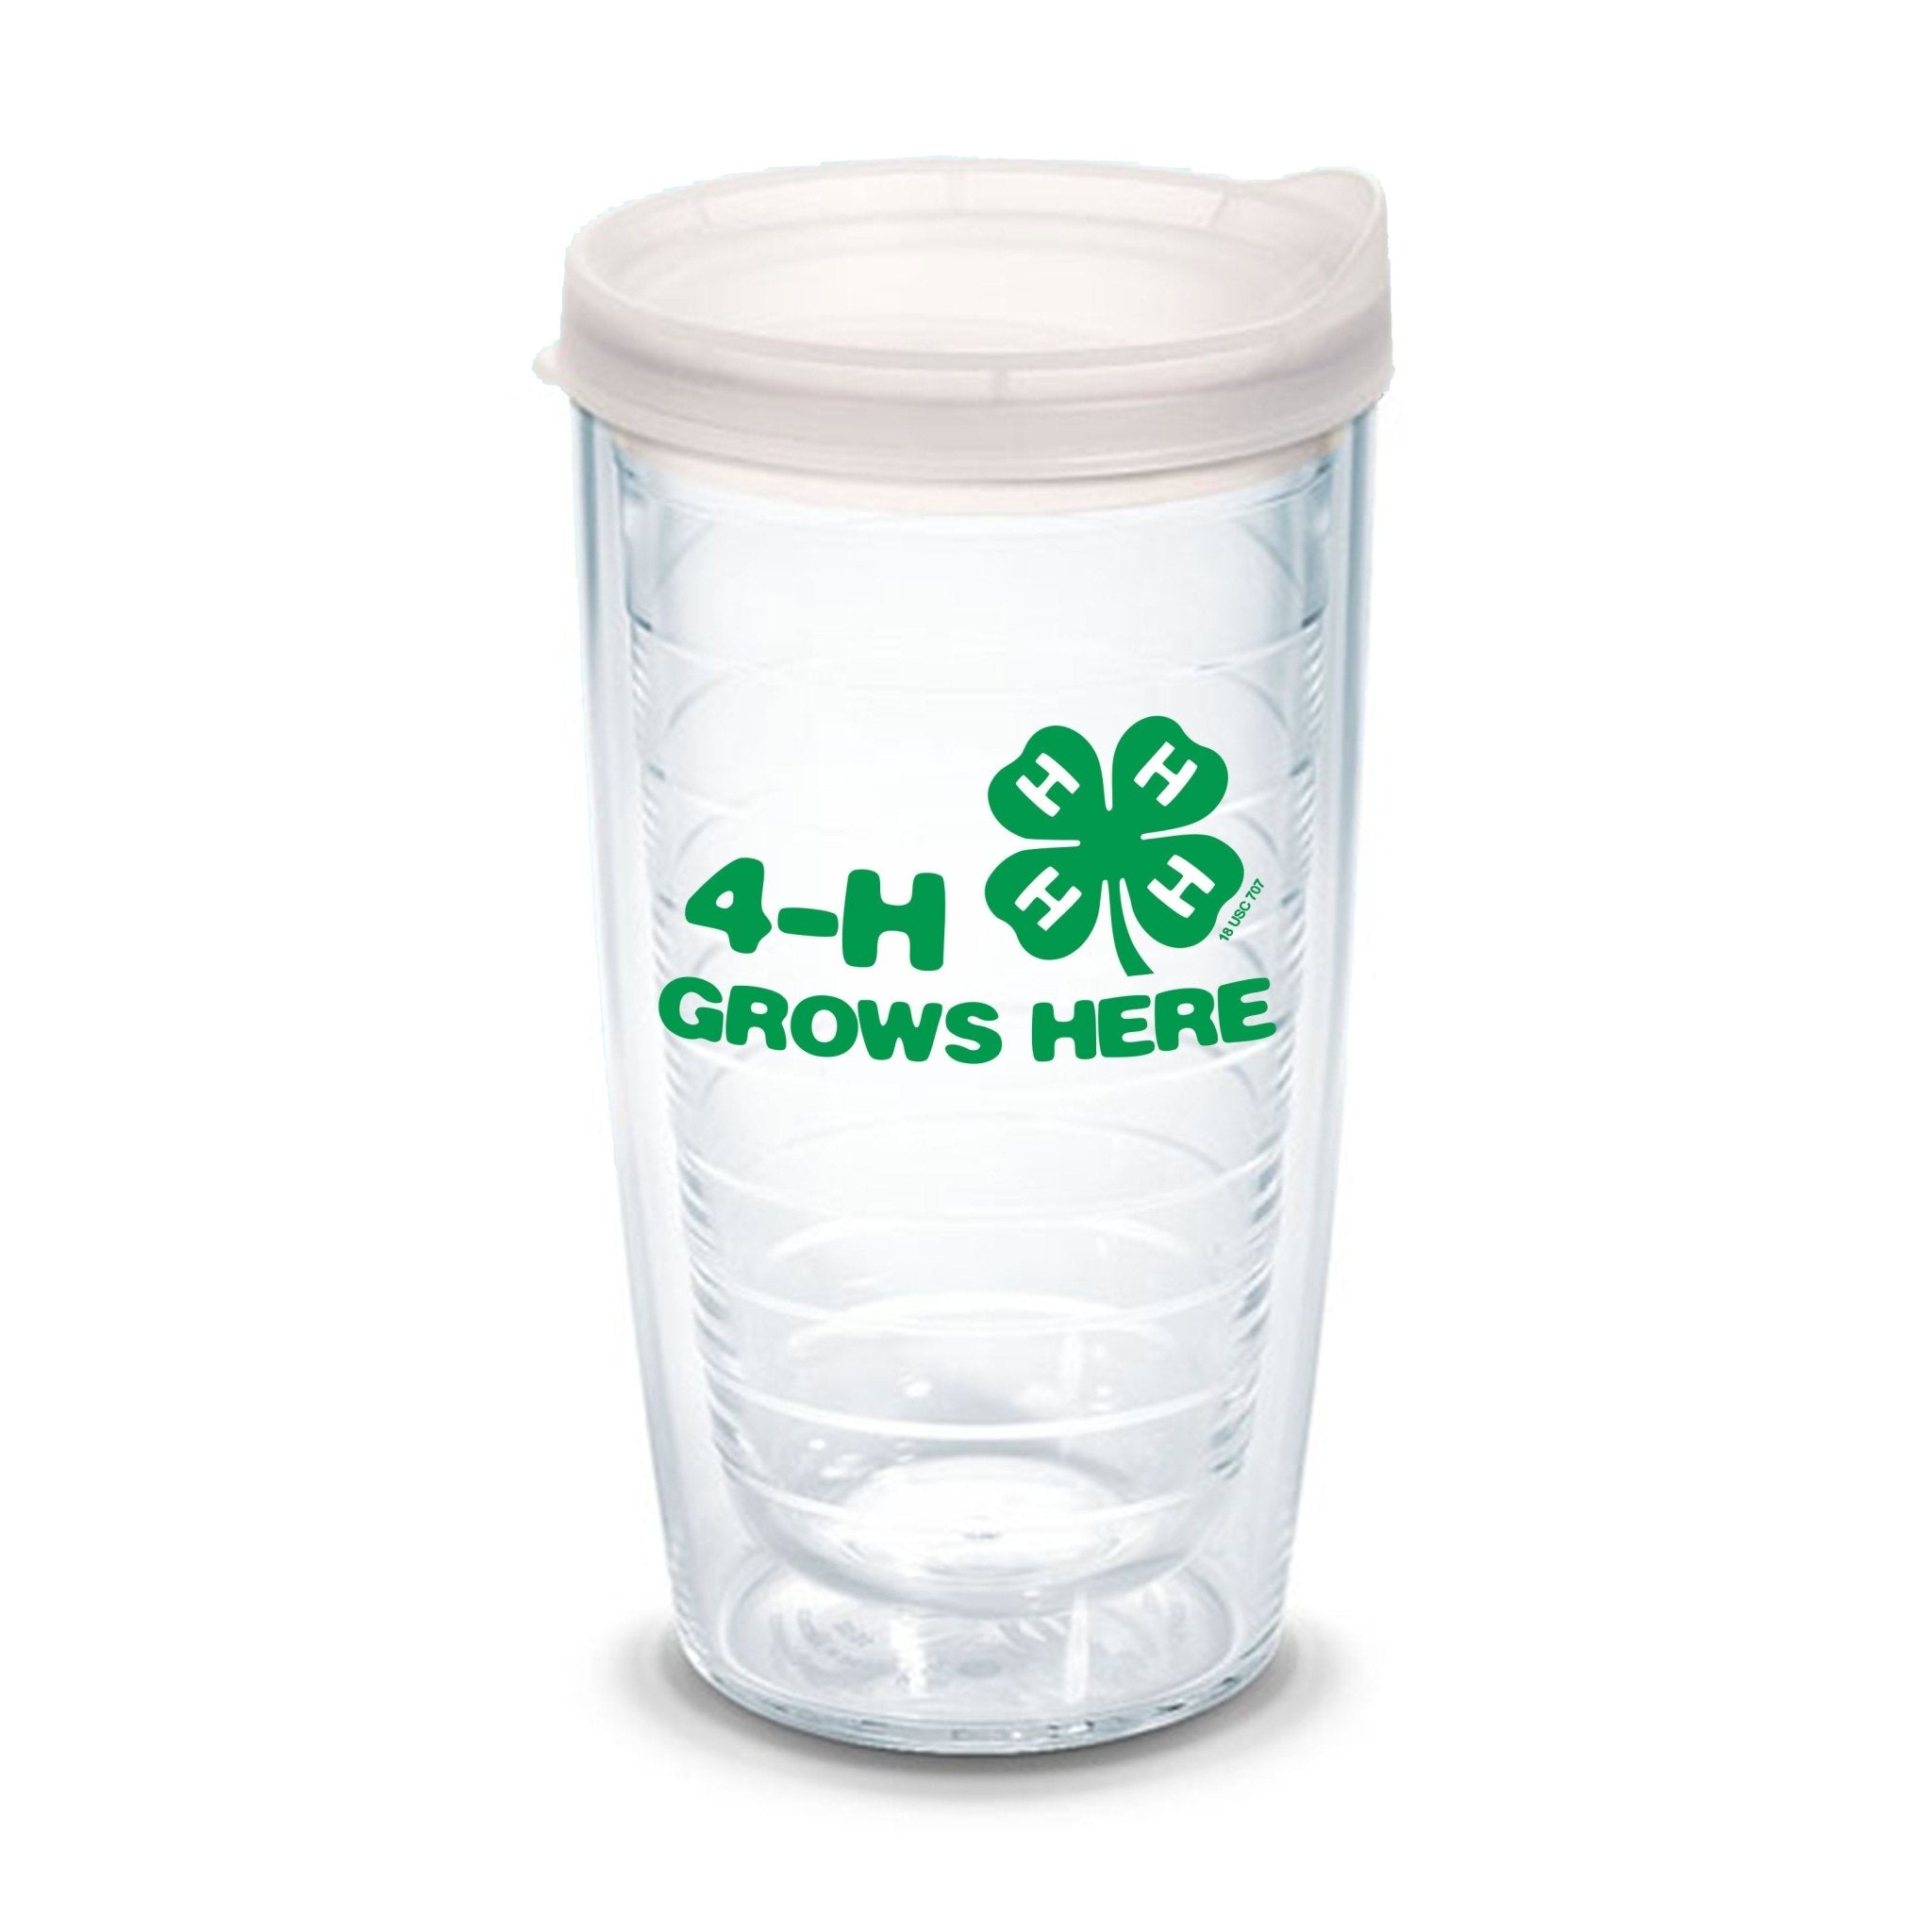 http://shop4-h.org/cdn/shop/products/16-oz-tervis-tumbler-with-lid-203709.jpg?v=1678826950